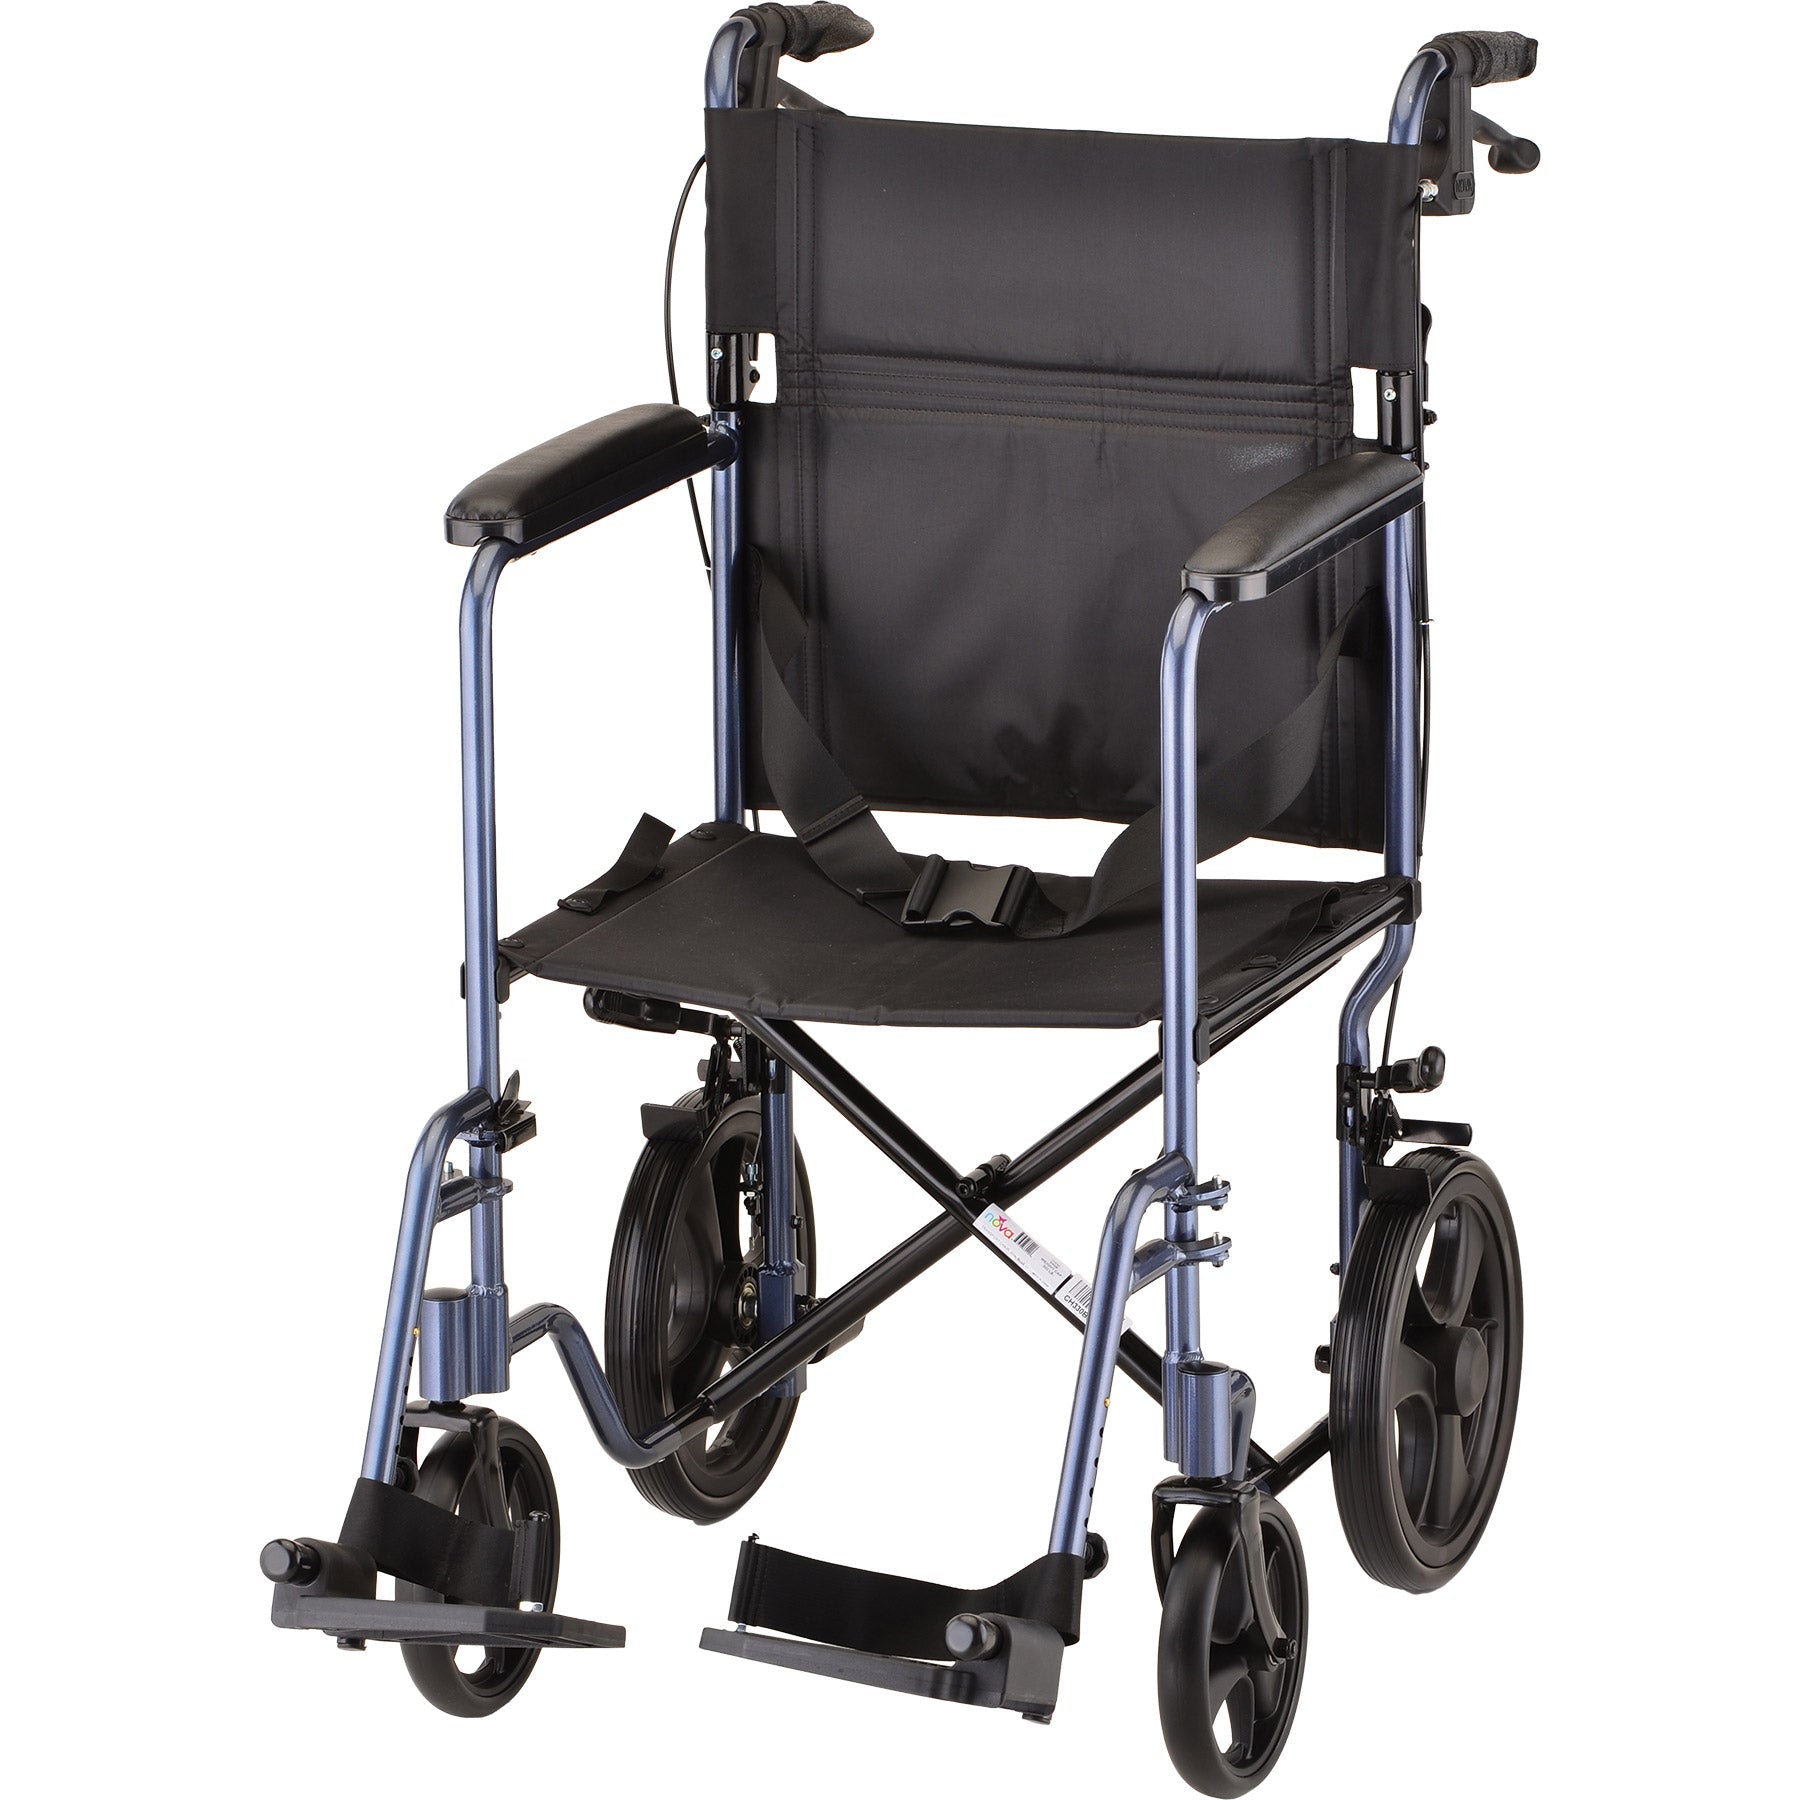 19" Transport Chair with Hand Brakes